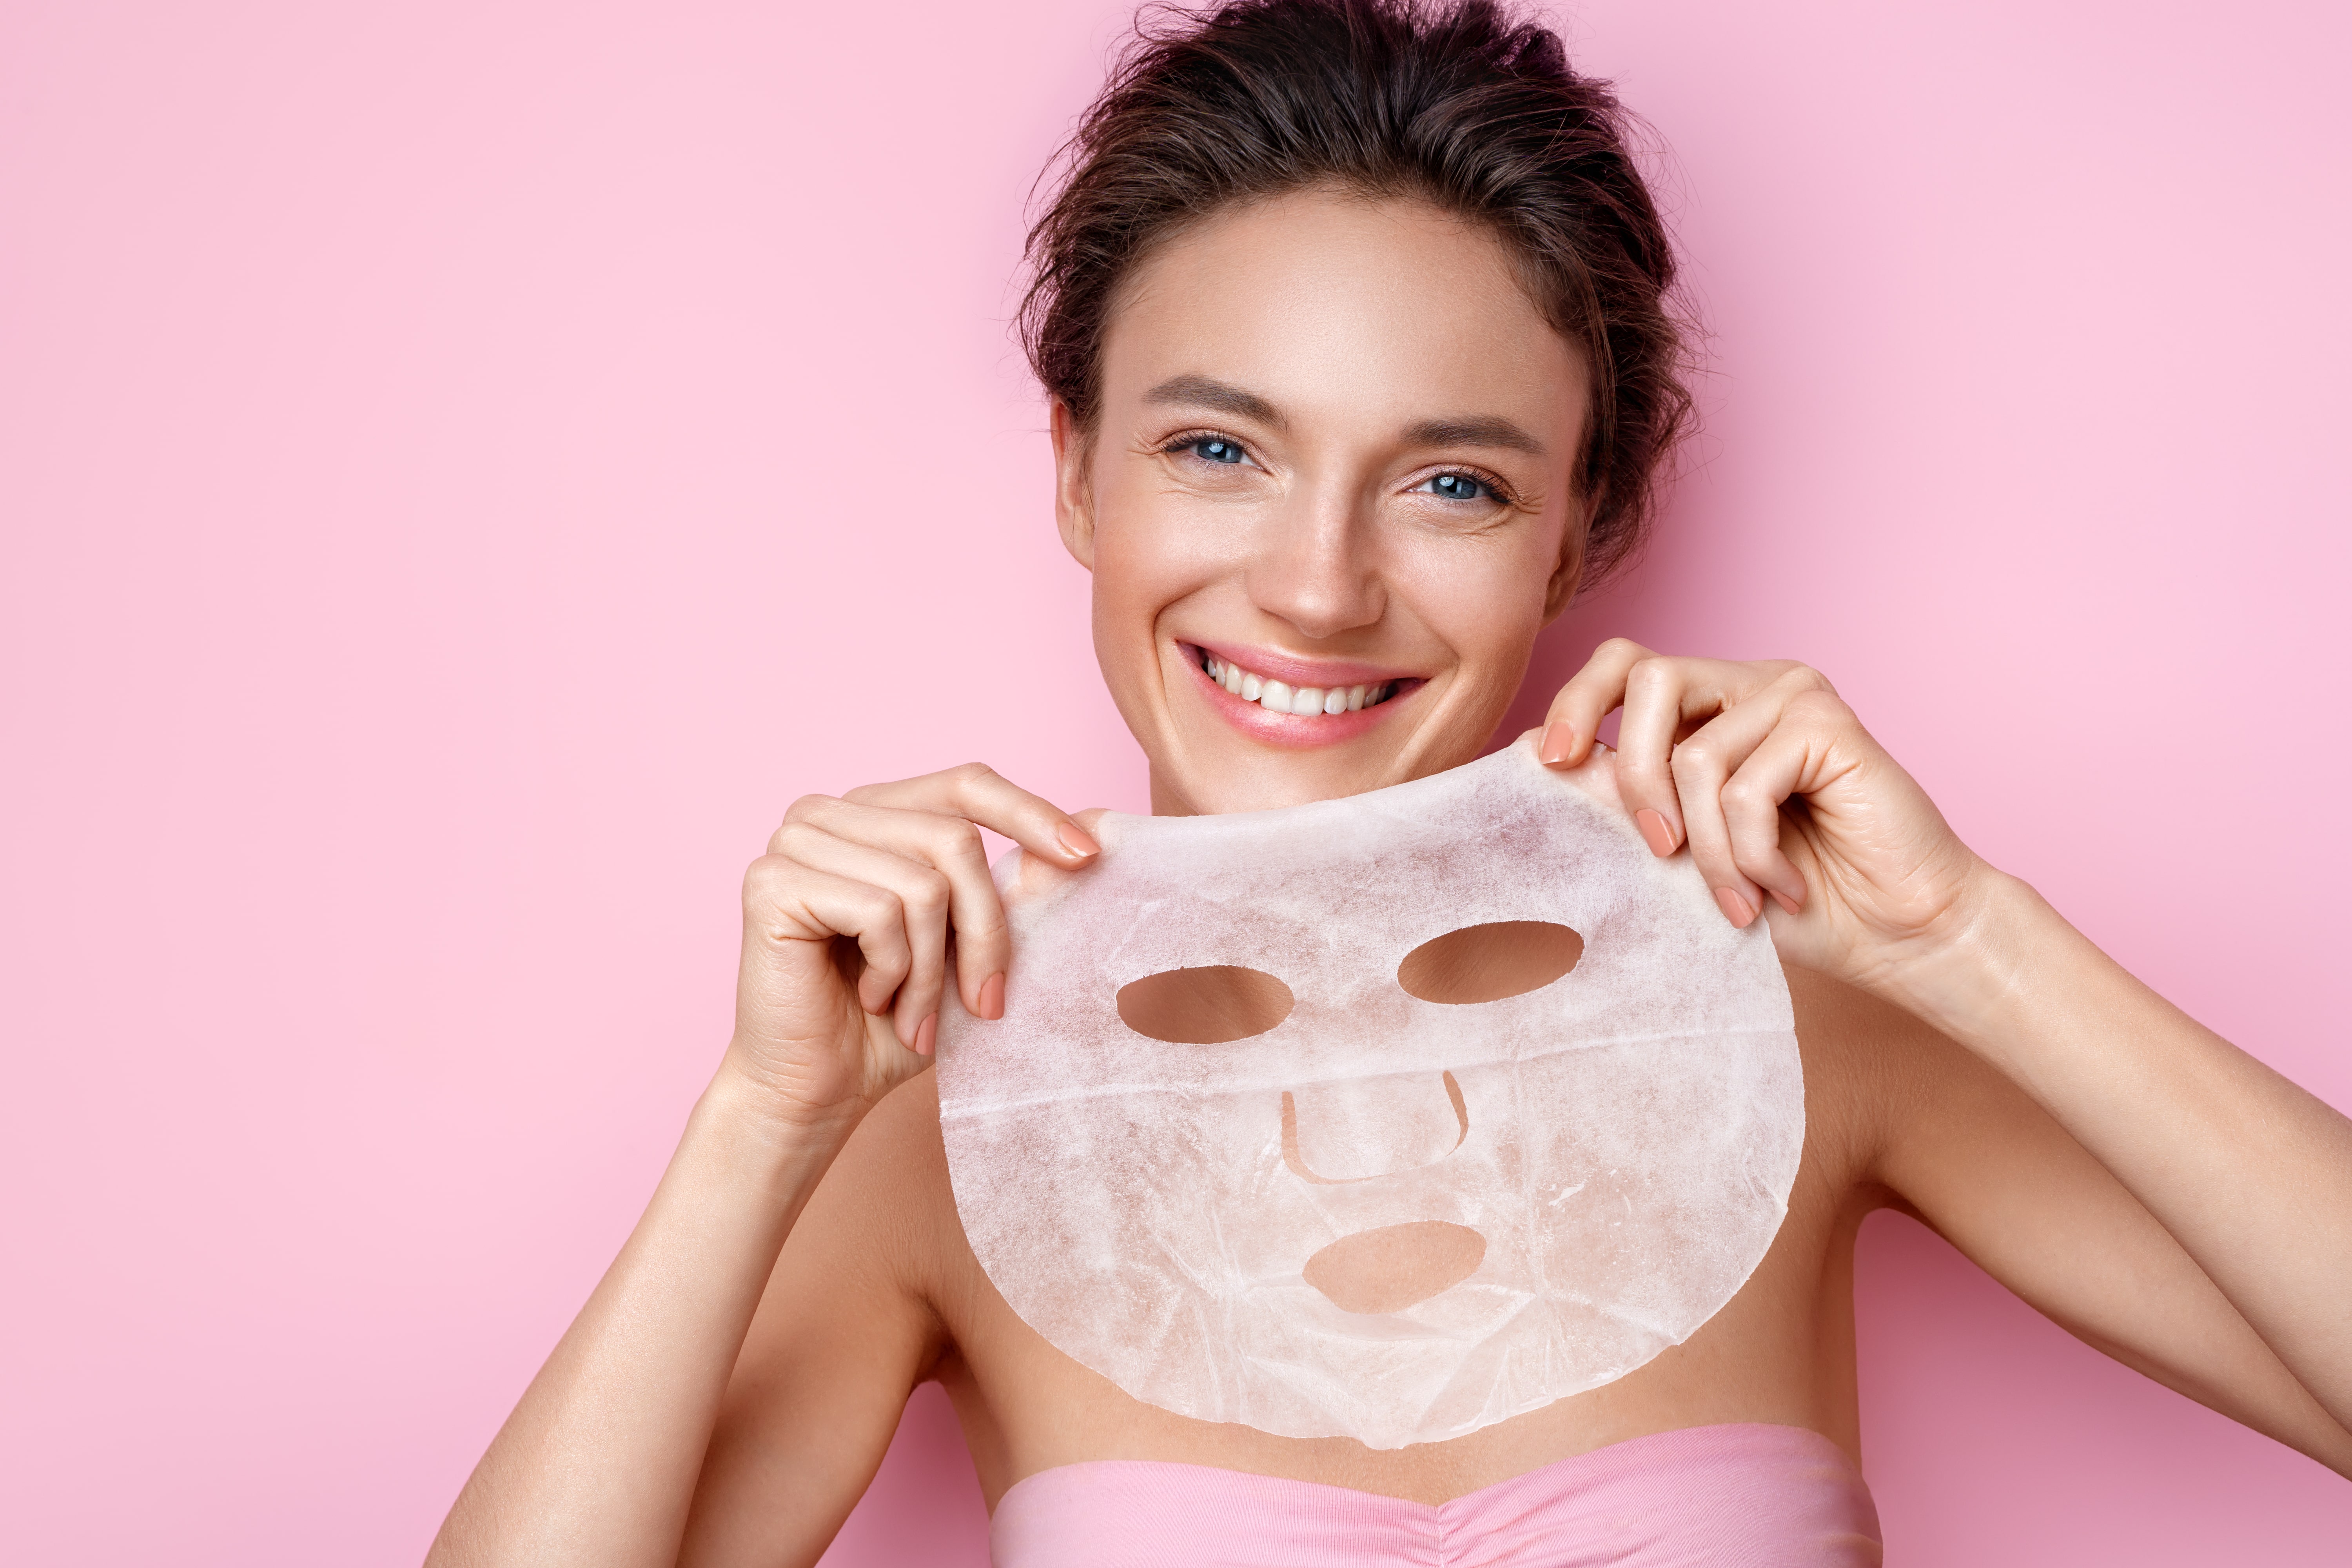 Sheet Masks vs. Rinse-Off Face Masks: What's the Difference?